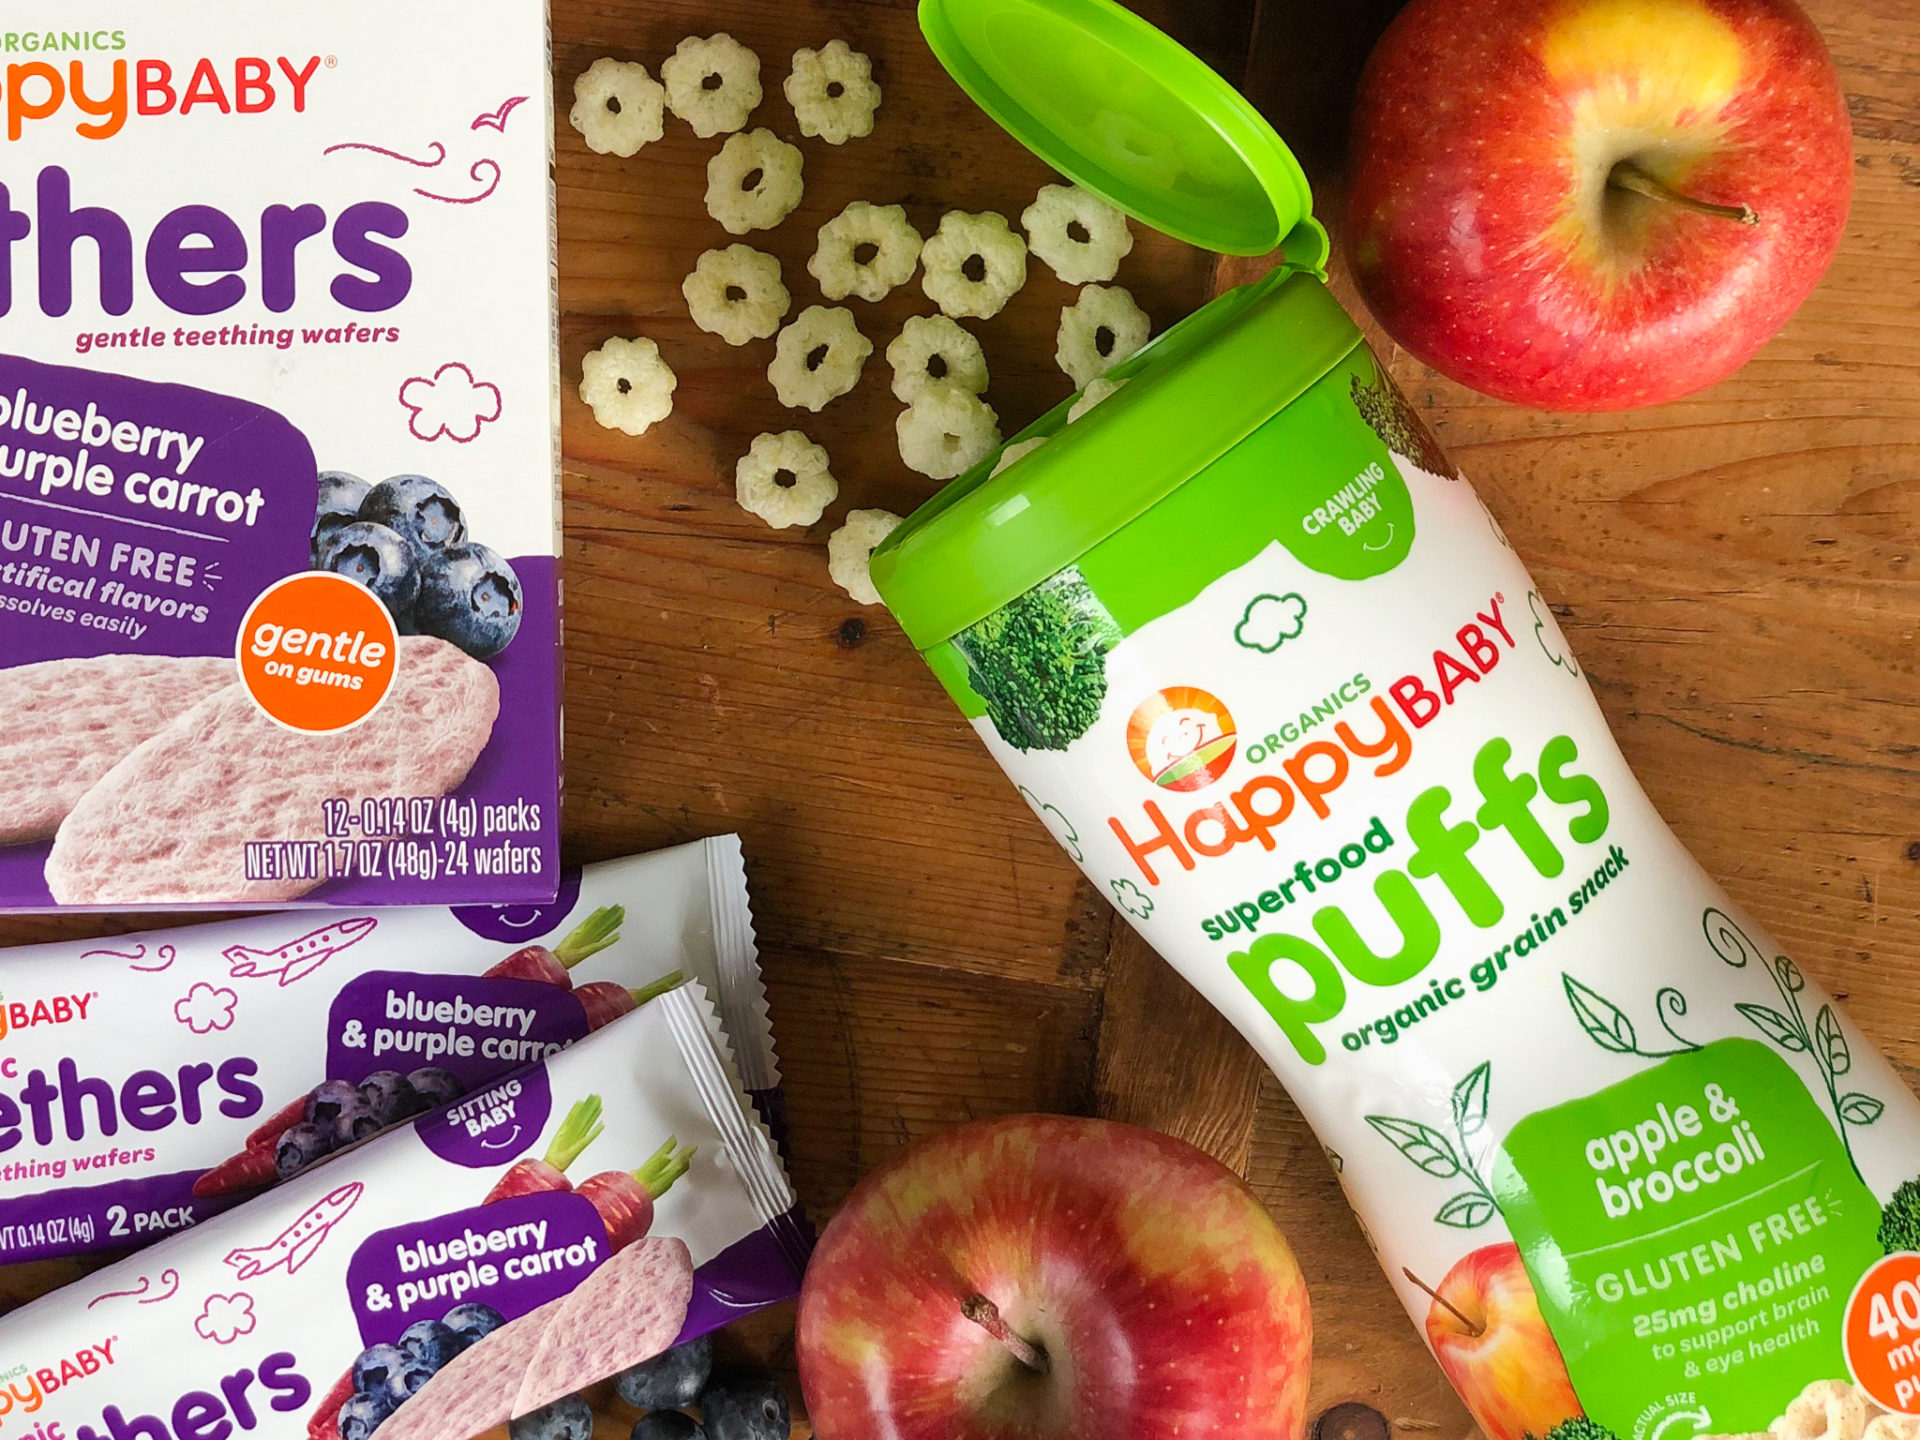 Happy Baby or Happy Tot Organic Snacks Are As Low As $1.64 At Kroger